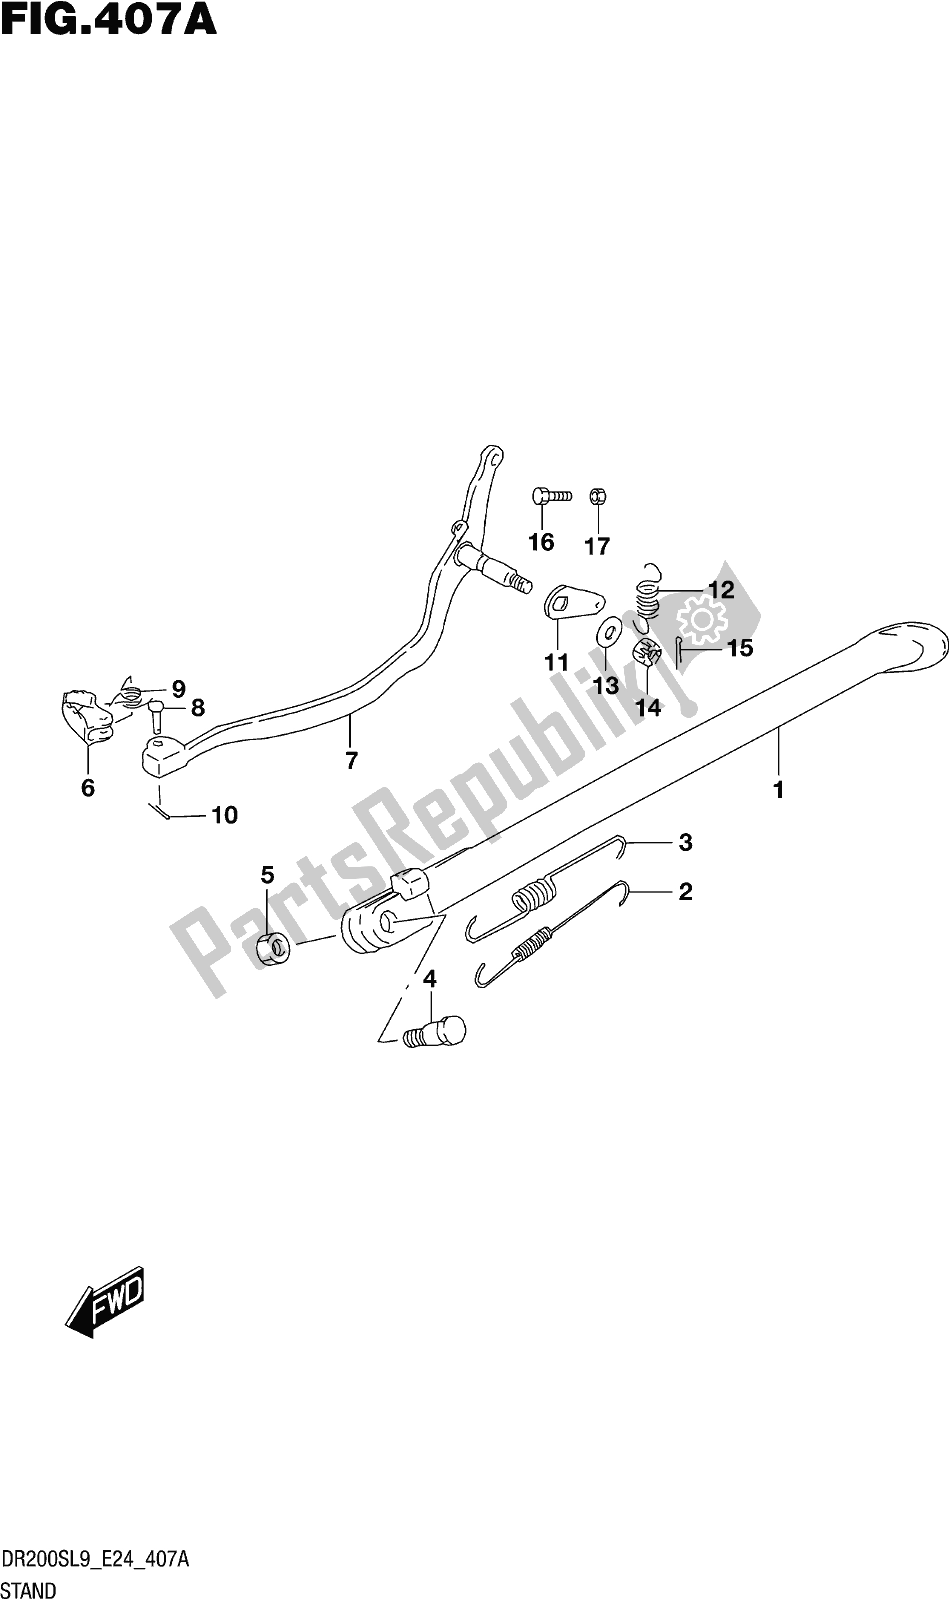 All parts for the Fig. 407a Stand of the Suzuki DR 200S 2019